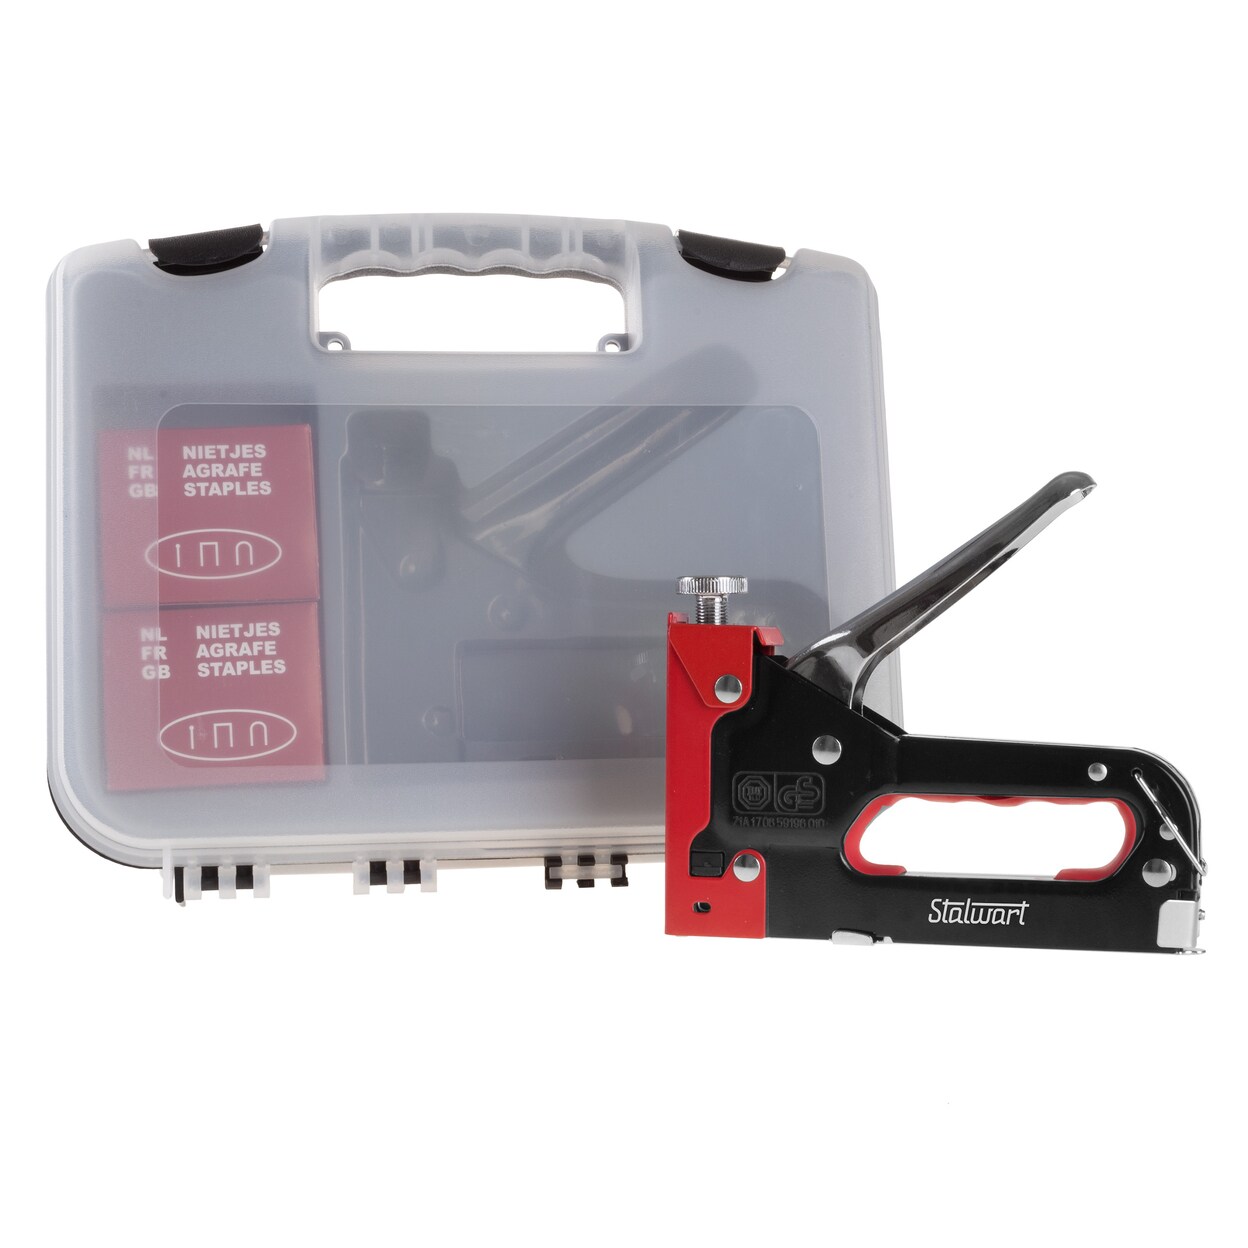 Stalwart Staple Gun 3Way Stapler with Staples Carrying Case for Fabrics Wood Crafts Red